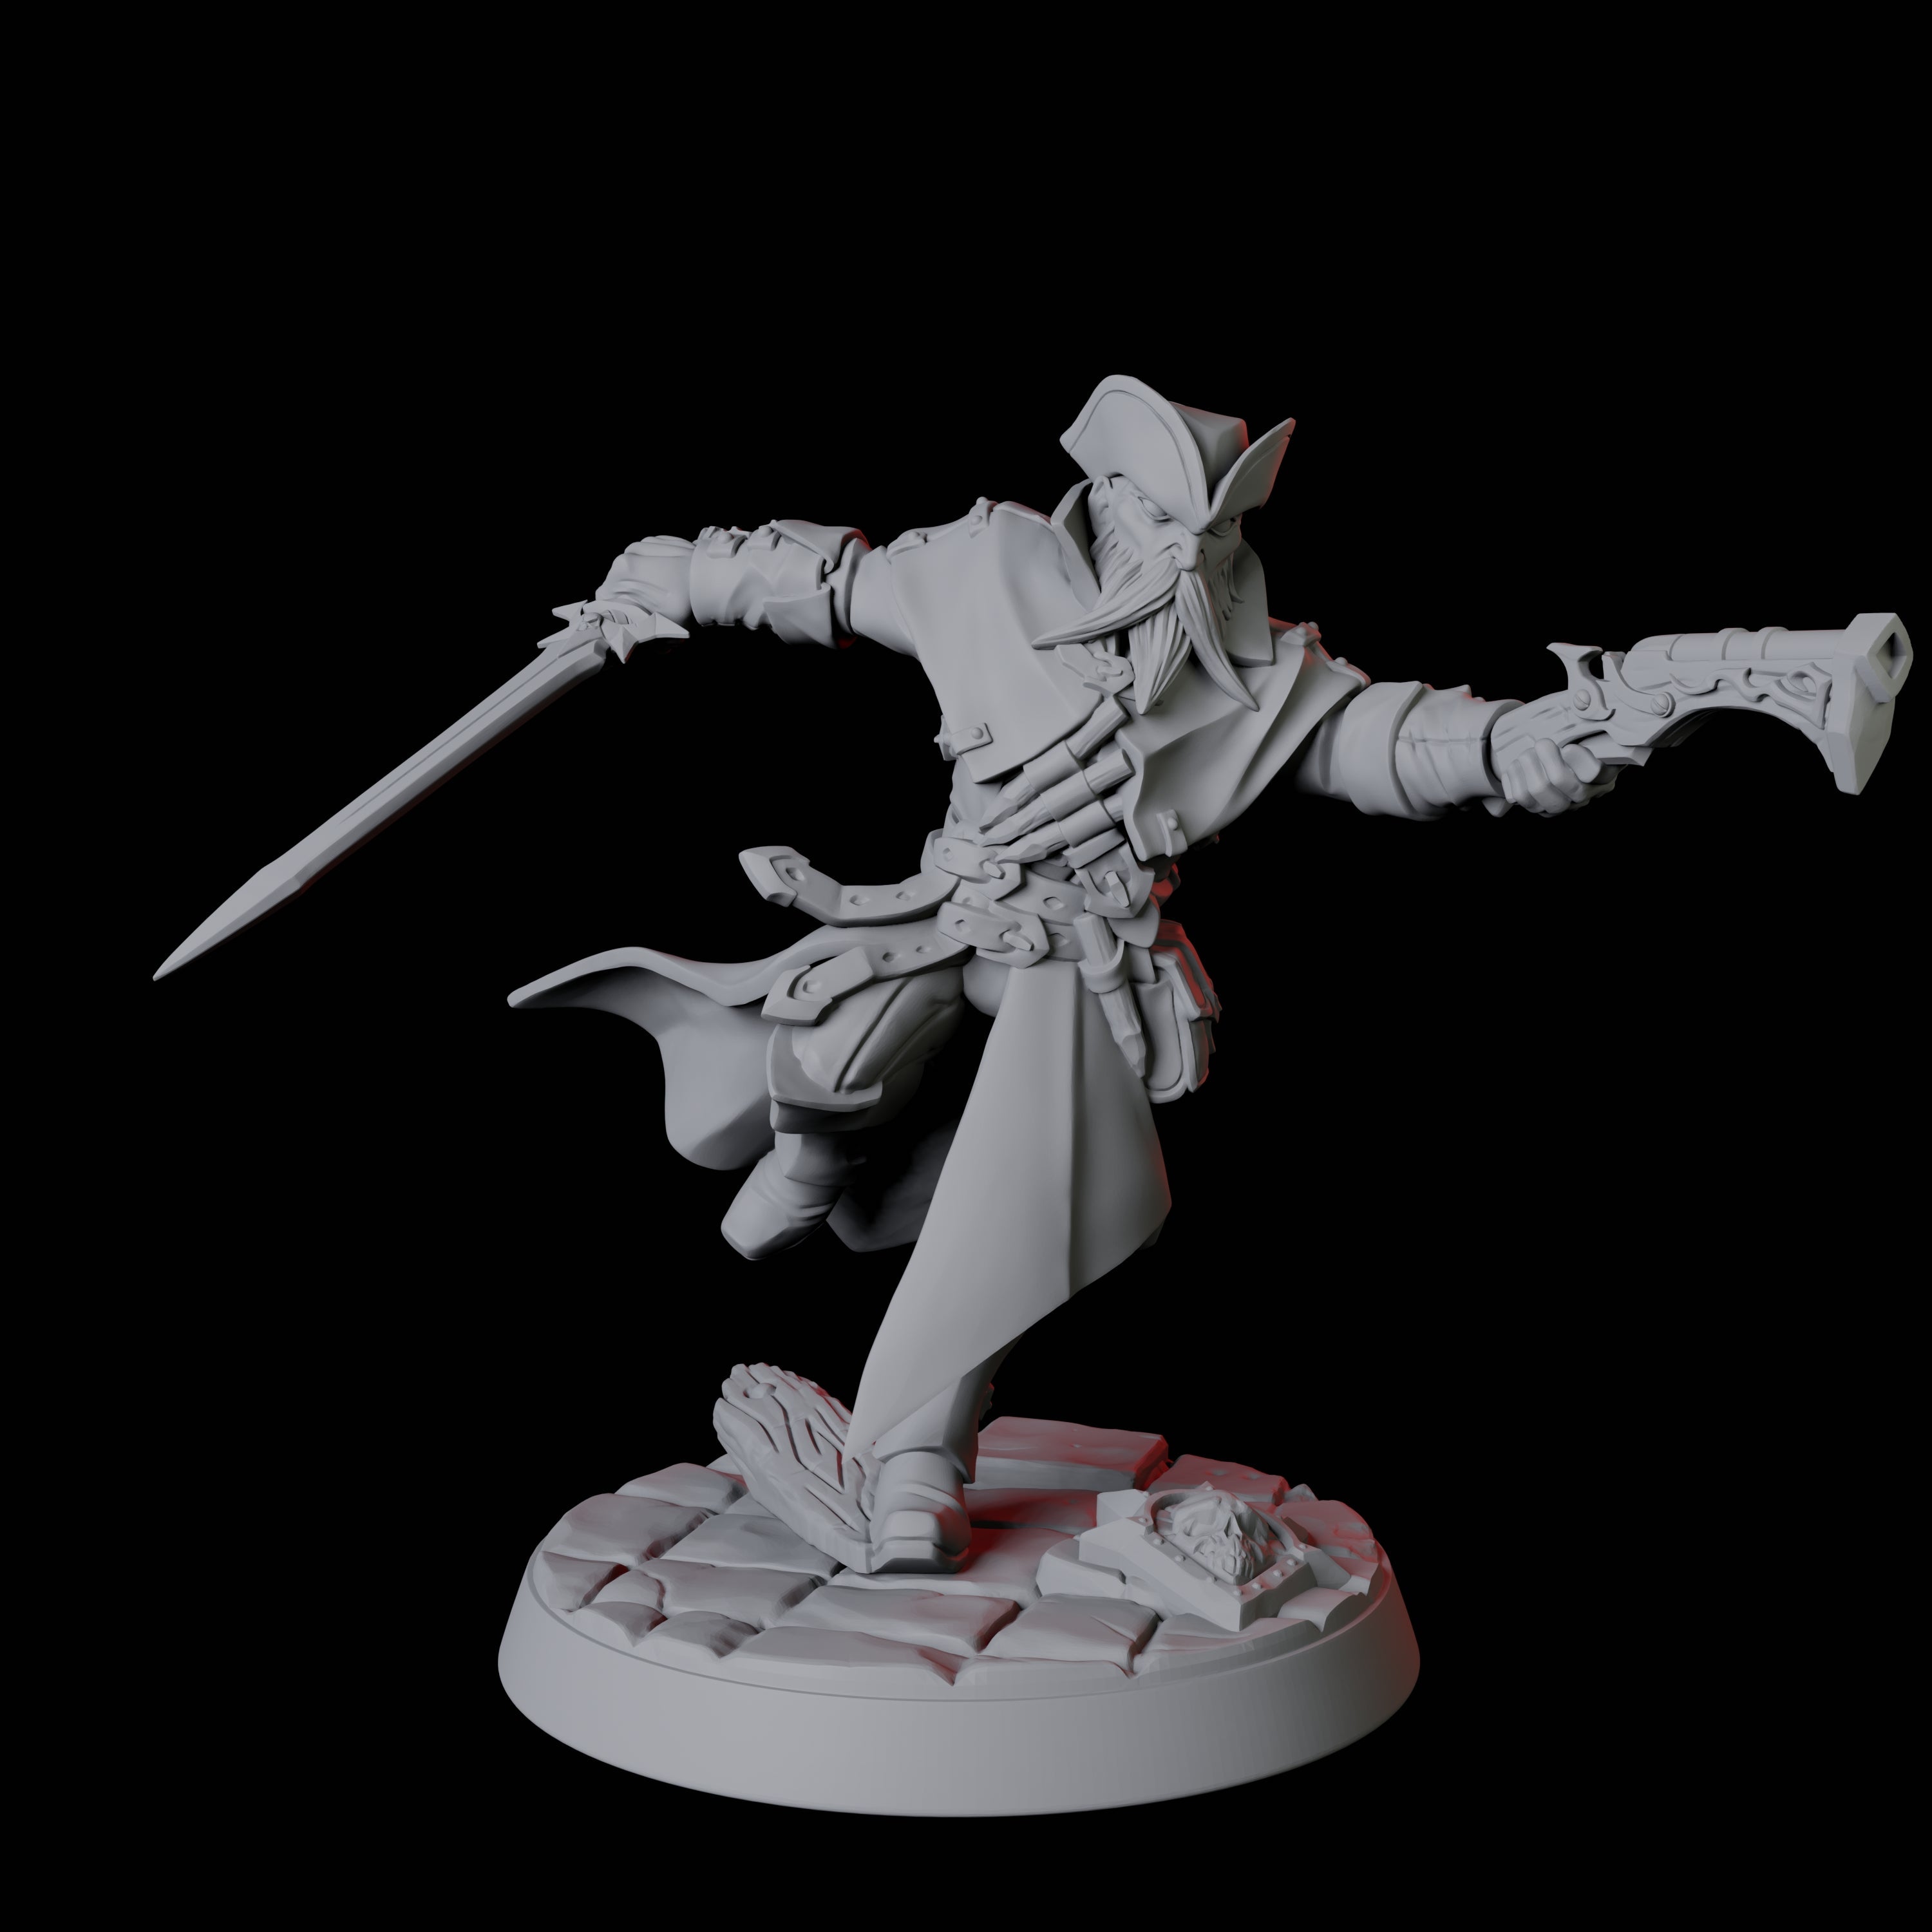 Vampire Hunter A Miniature for Dungeons and Dragons, Pathfinder or other TTRPGs